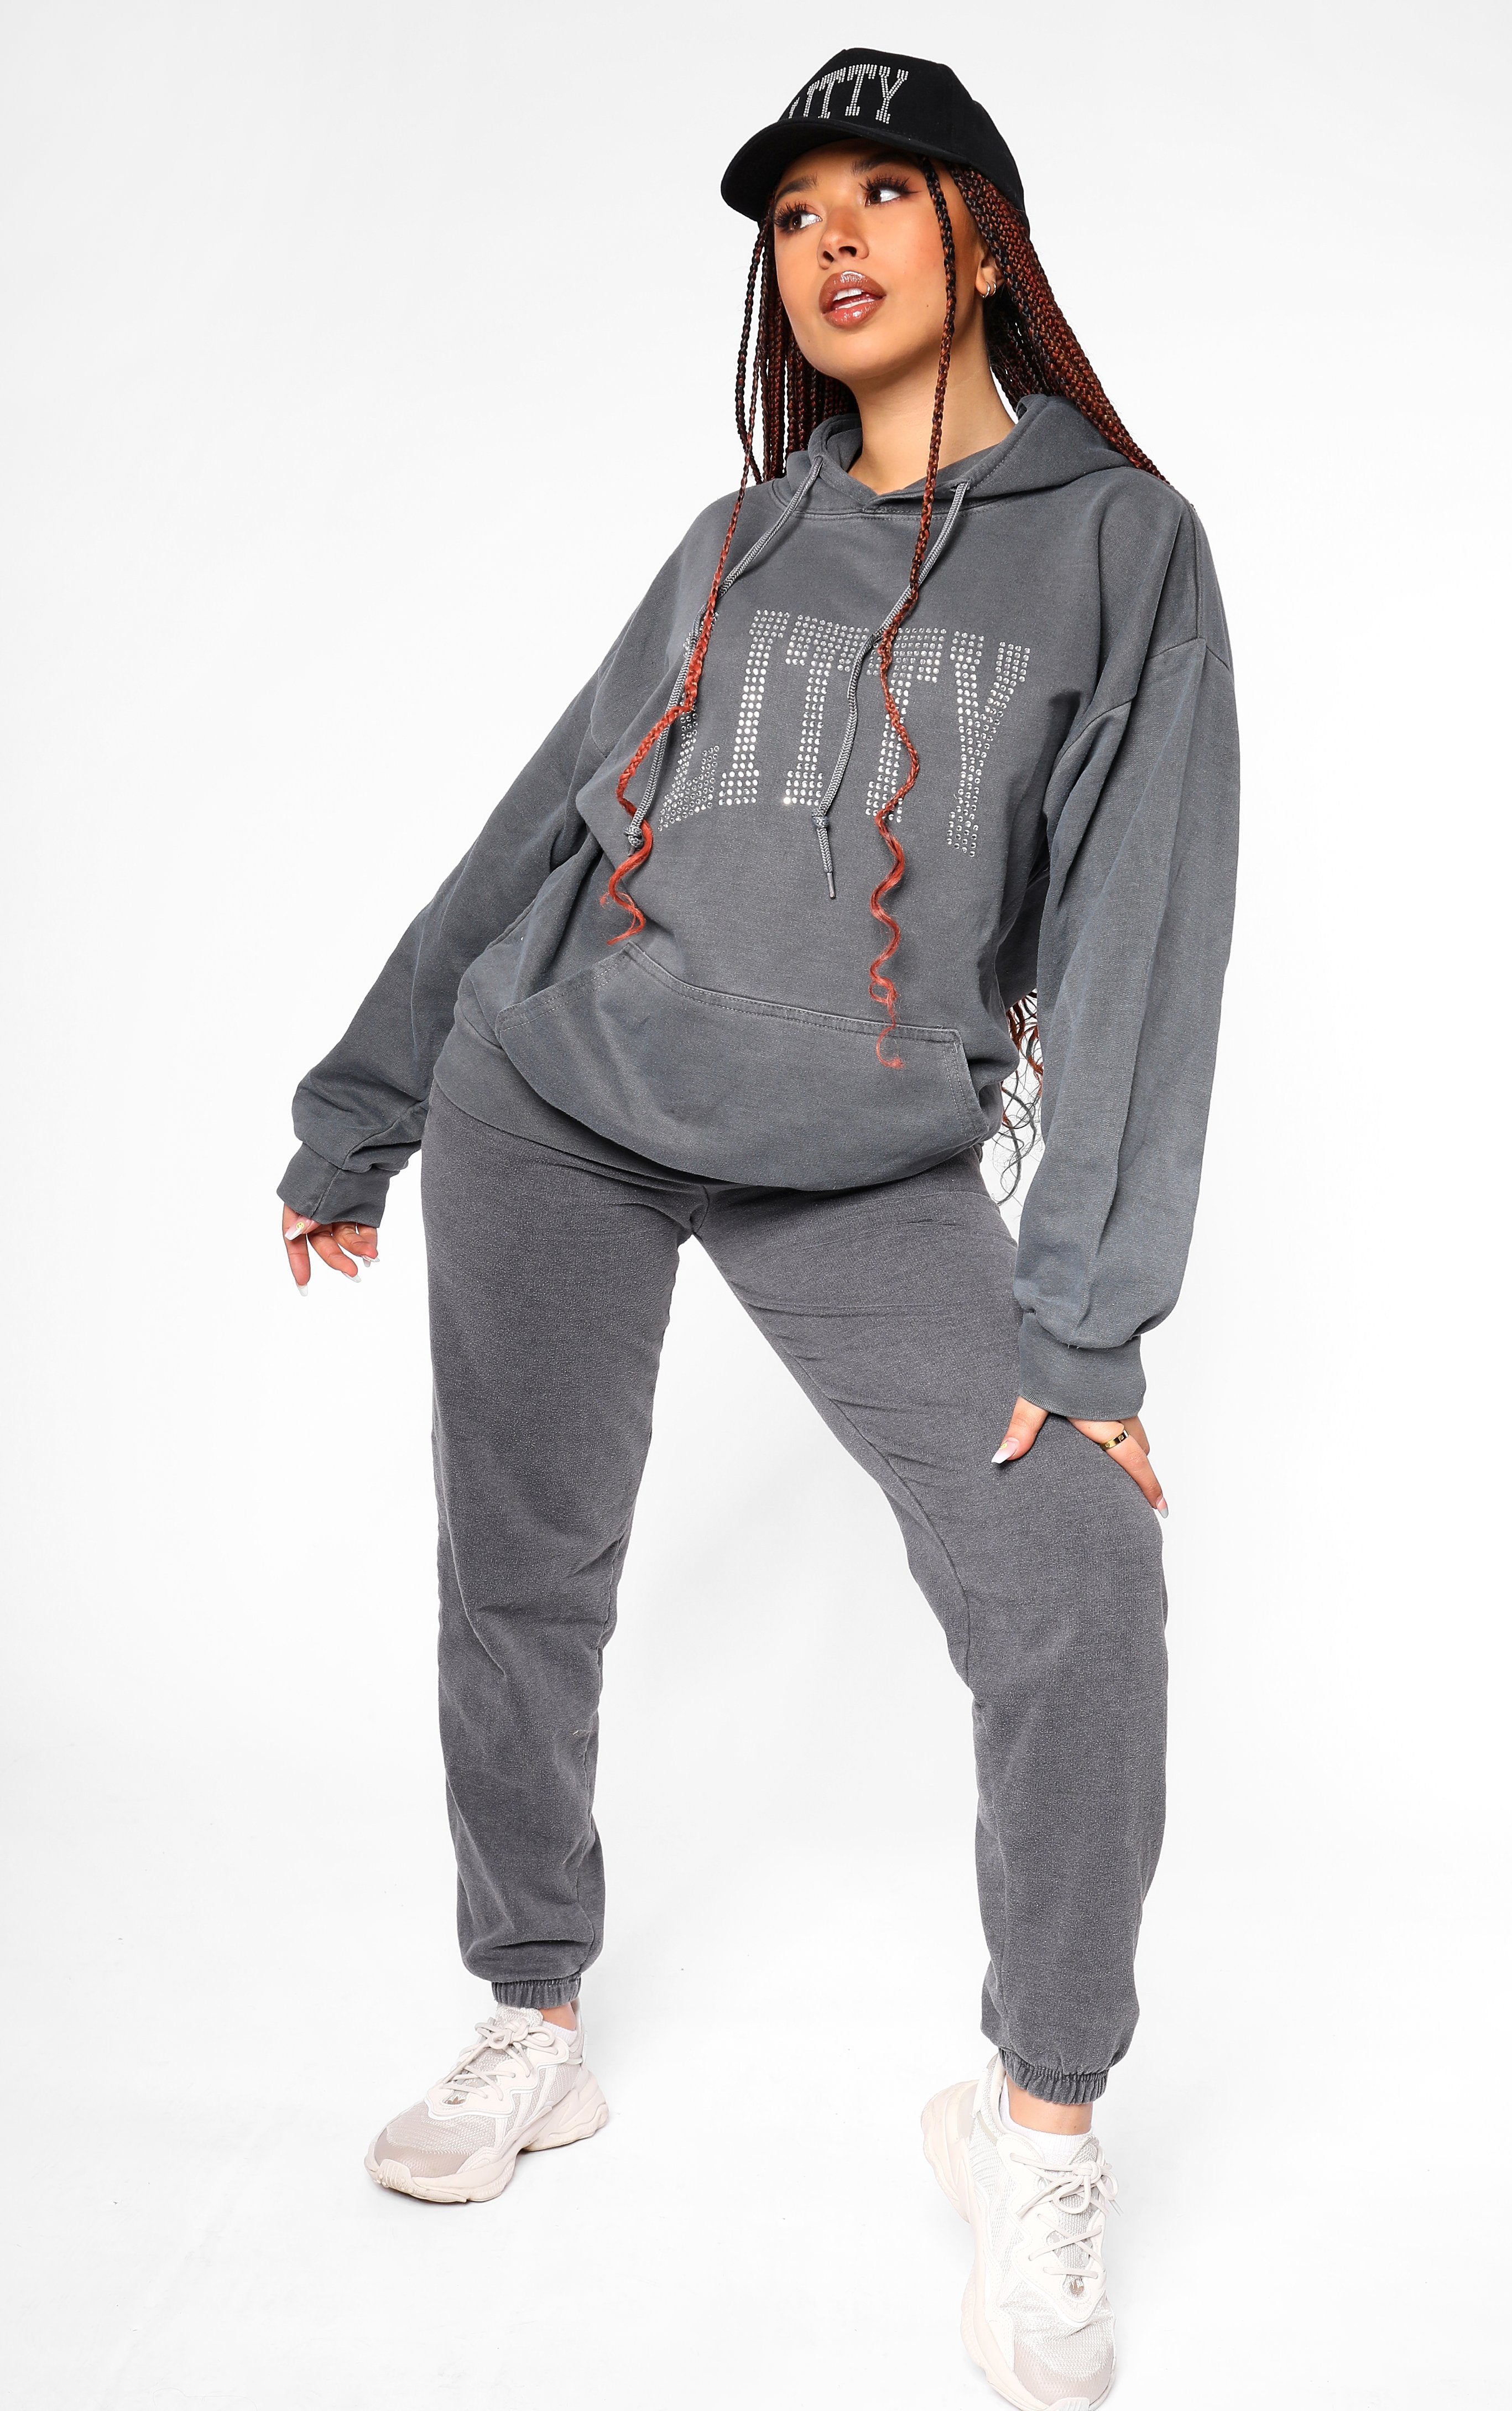 LITTY Slogan Diamante Washed Charcoal Hoodie